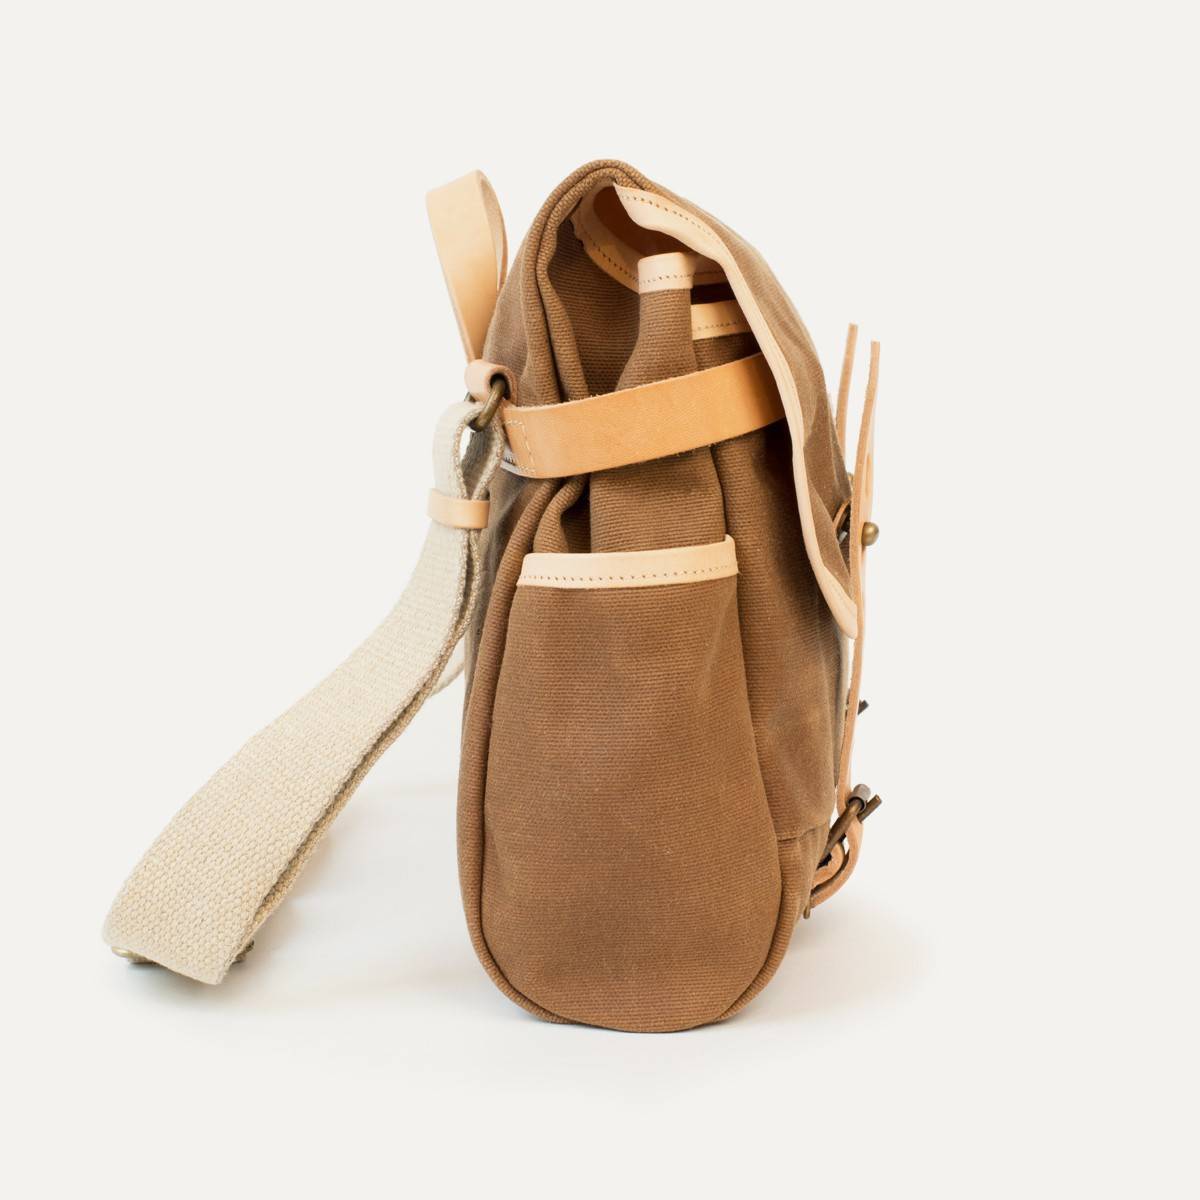 Musette Mariole WAXY - Camel/Naturel (image n°3)